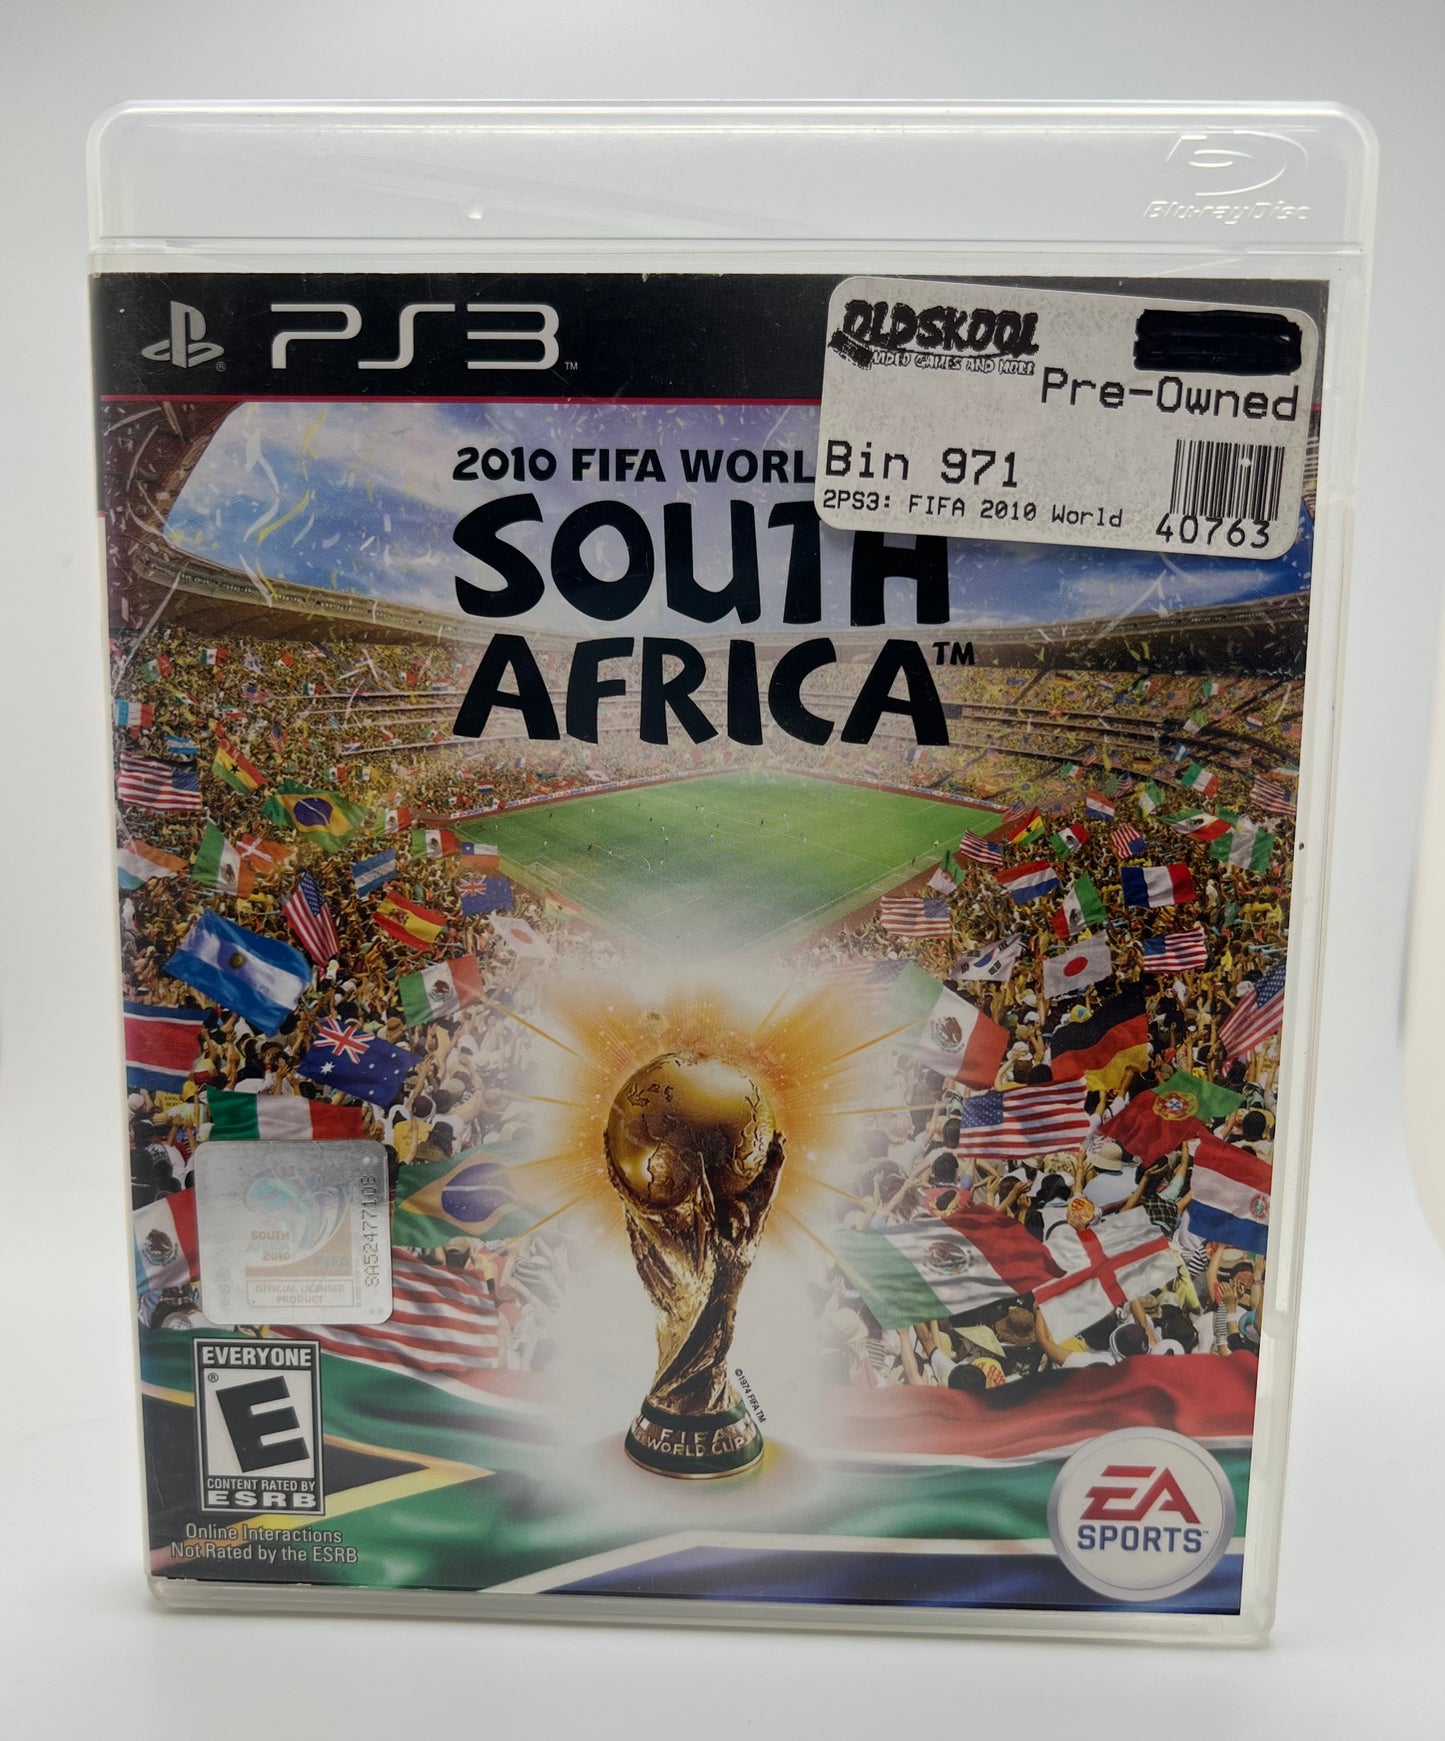 FIFA 2010 World Cup South Africa - Playstation 3